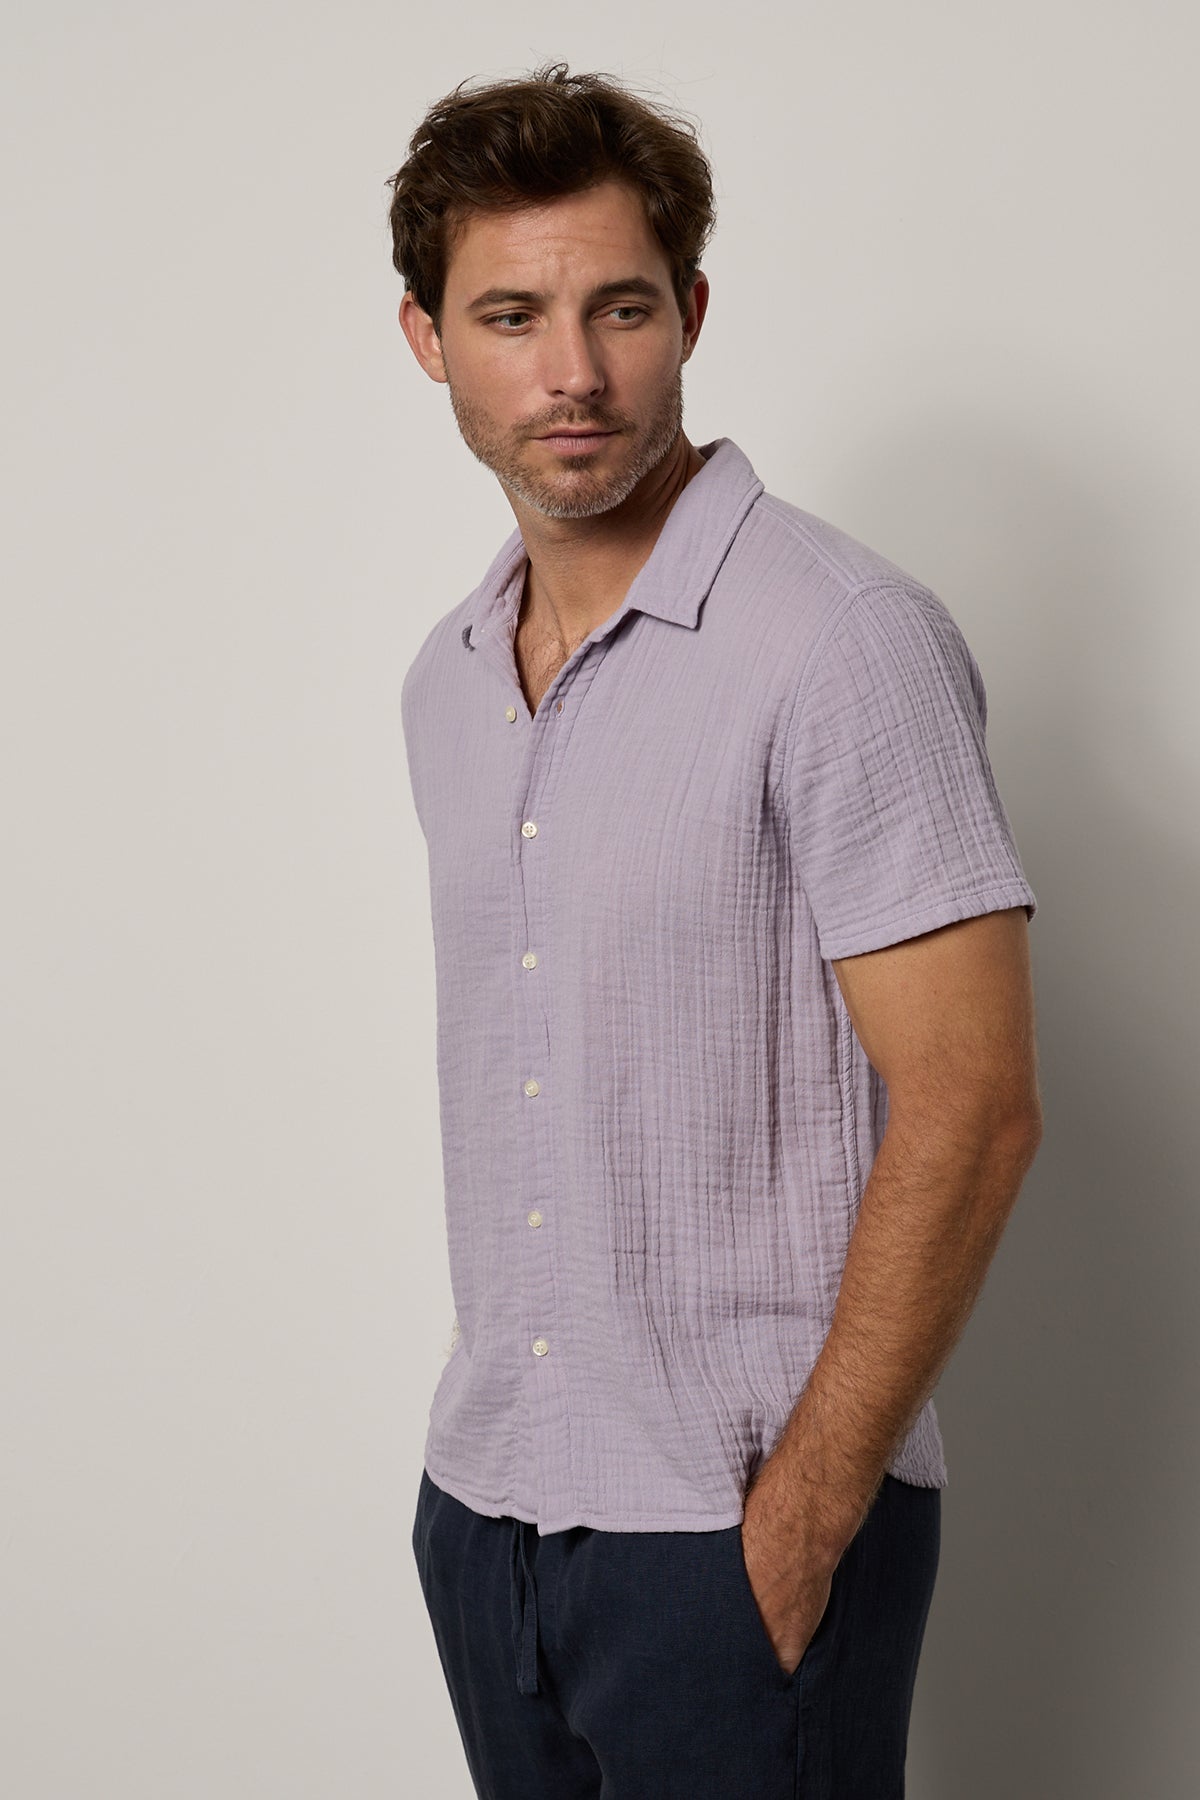 Christian Shirt in lilac with Vann pants in navy side & front model with hand in pants pocket-26266329645249